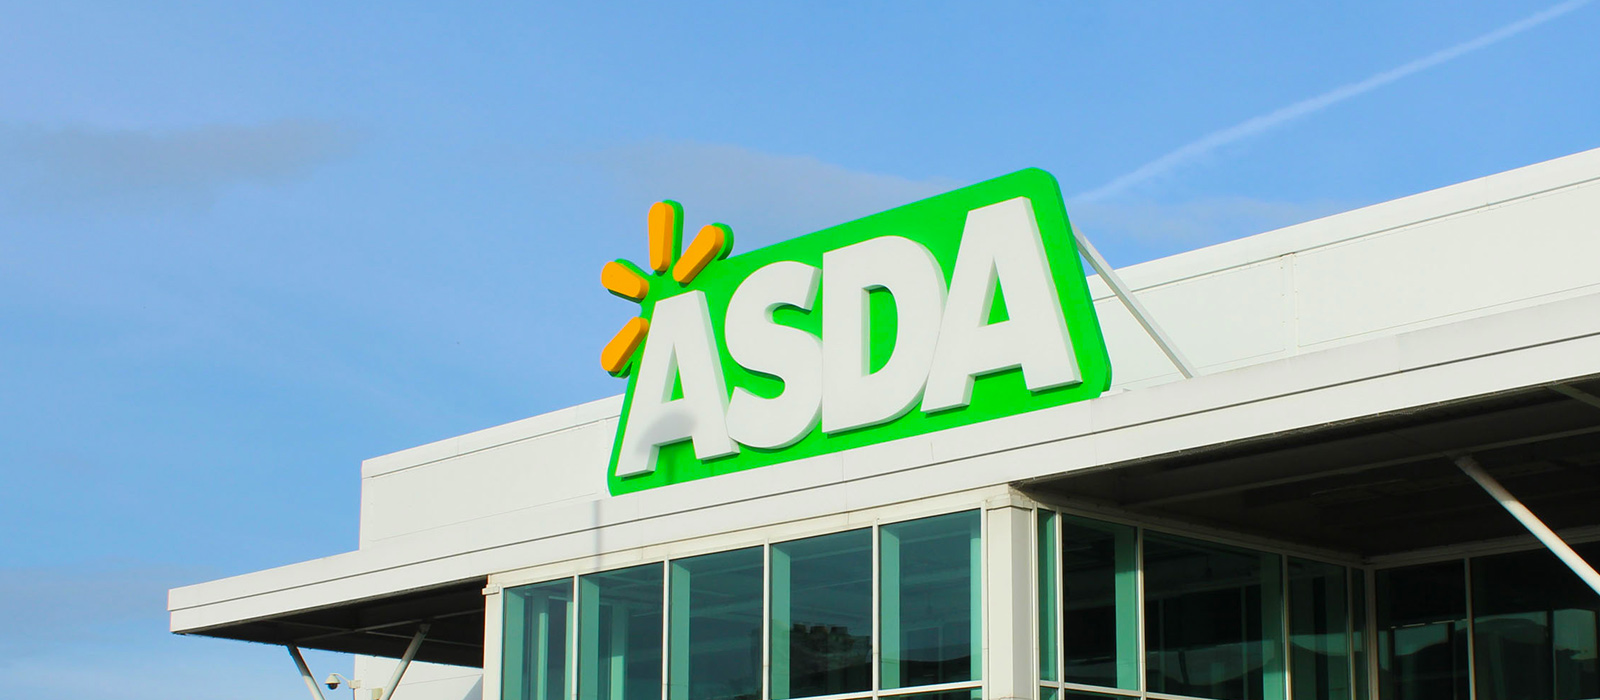 The ASDA on top of a superstore.